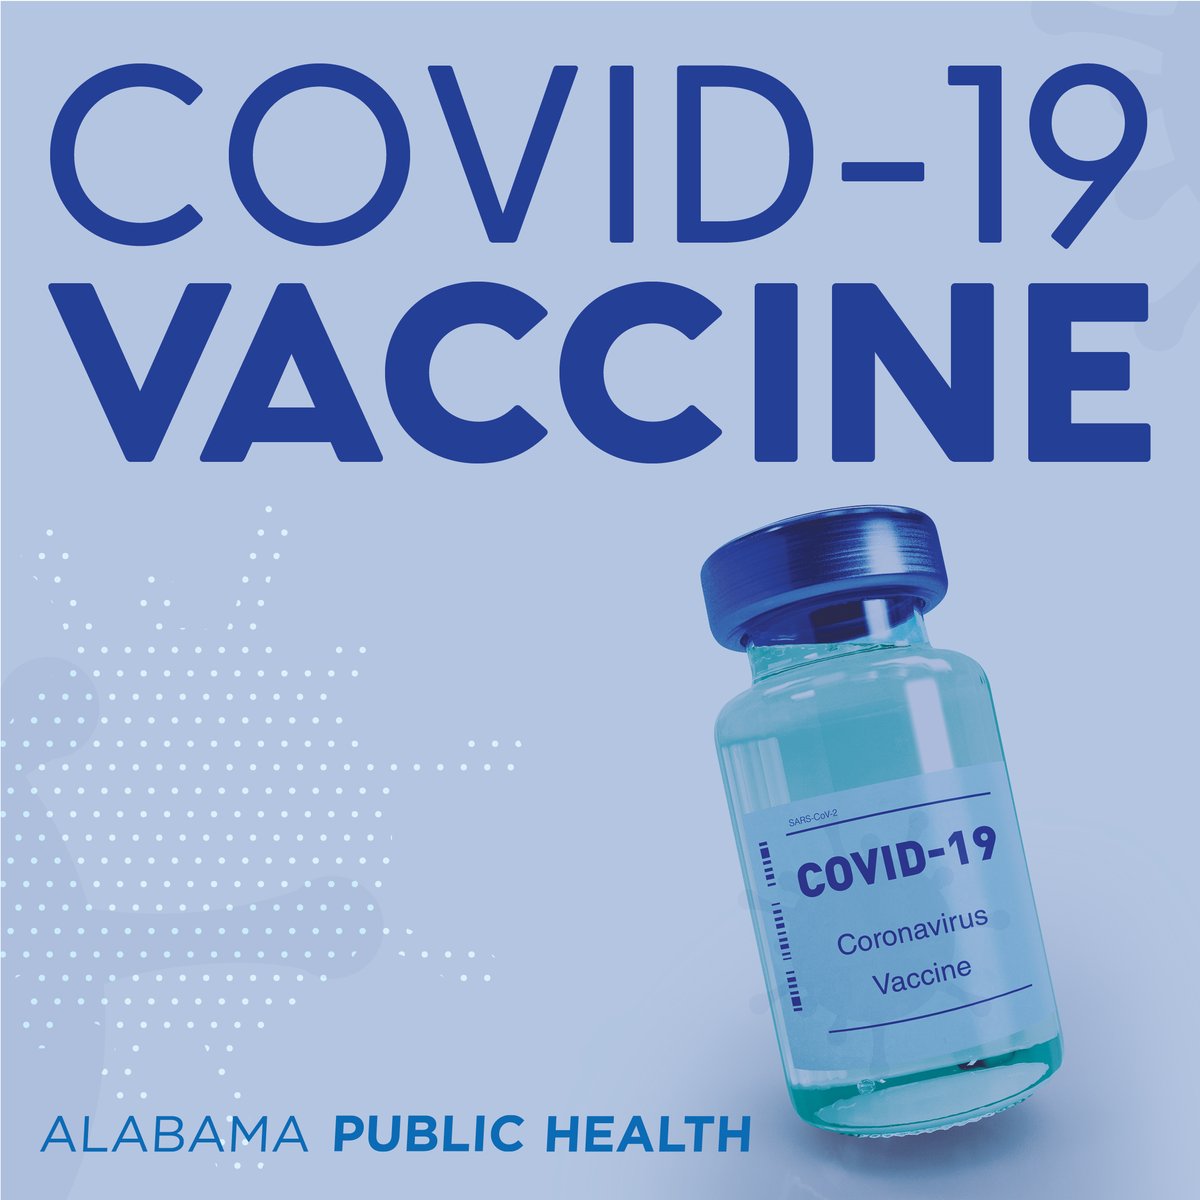 THREAD - Vaccine Update: Second dose Alabama National Guard clinics (info found here:  http://go.usa.gov/xshav ) will begin on April 13, rotating through the counties that have already been visited for Pfizer primary doses. 1/4